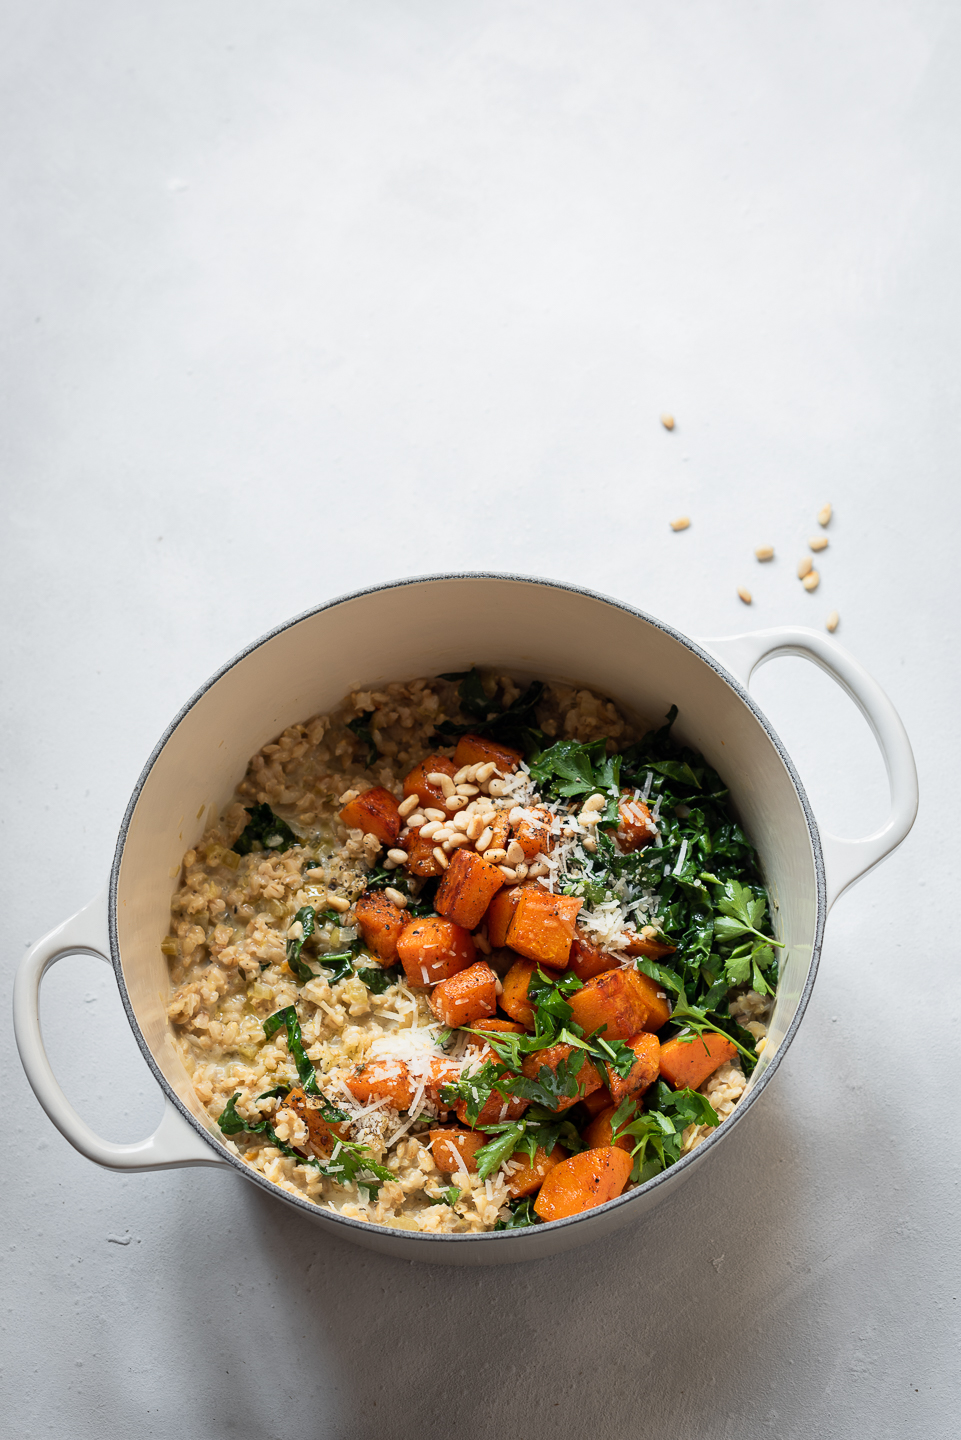 Barley risotto with kale and butternut